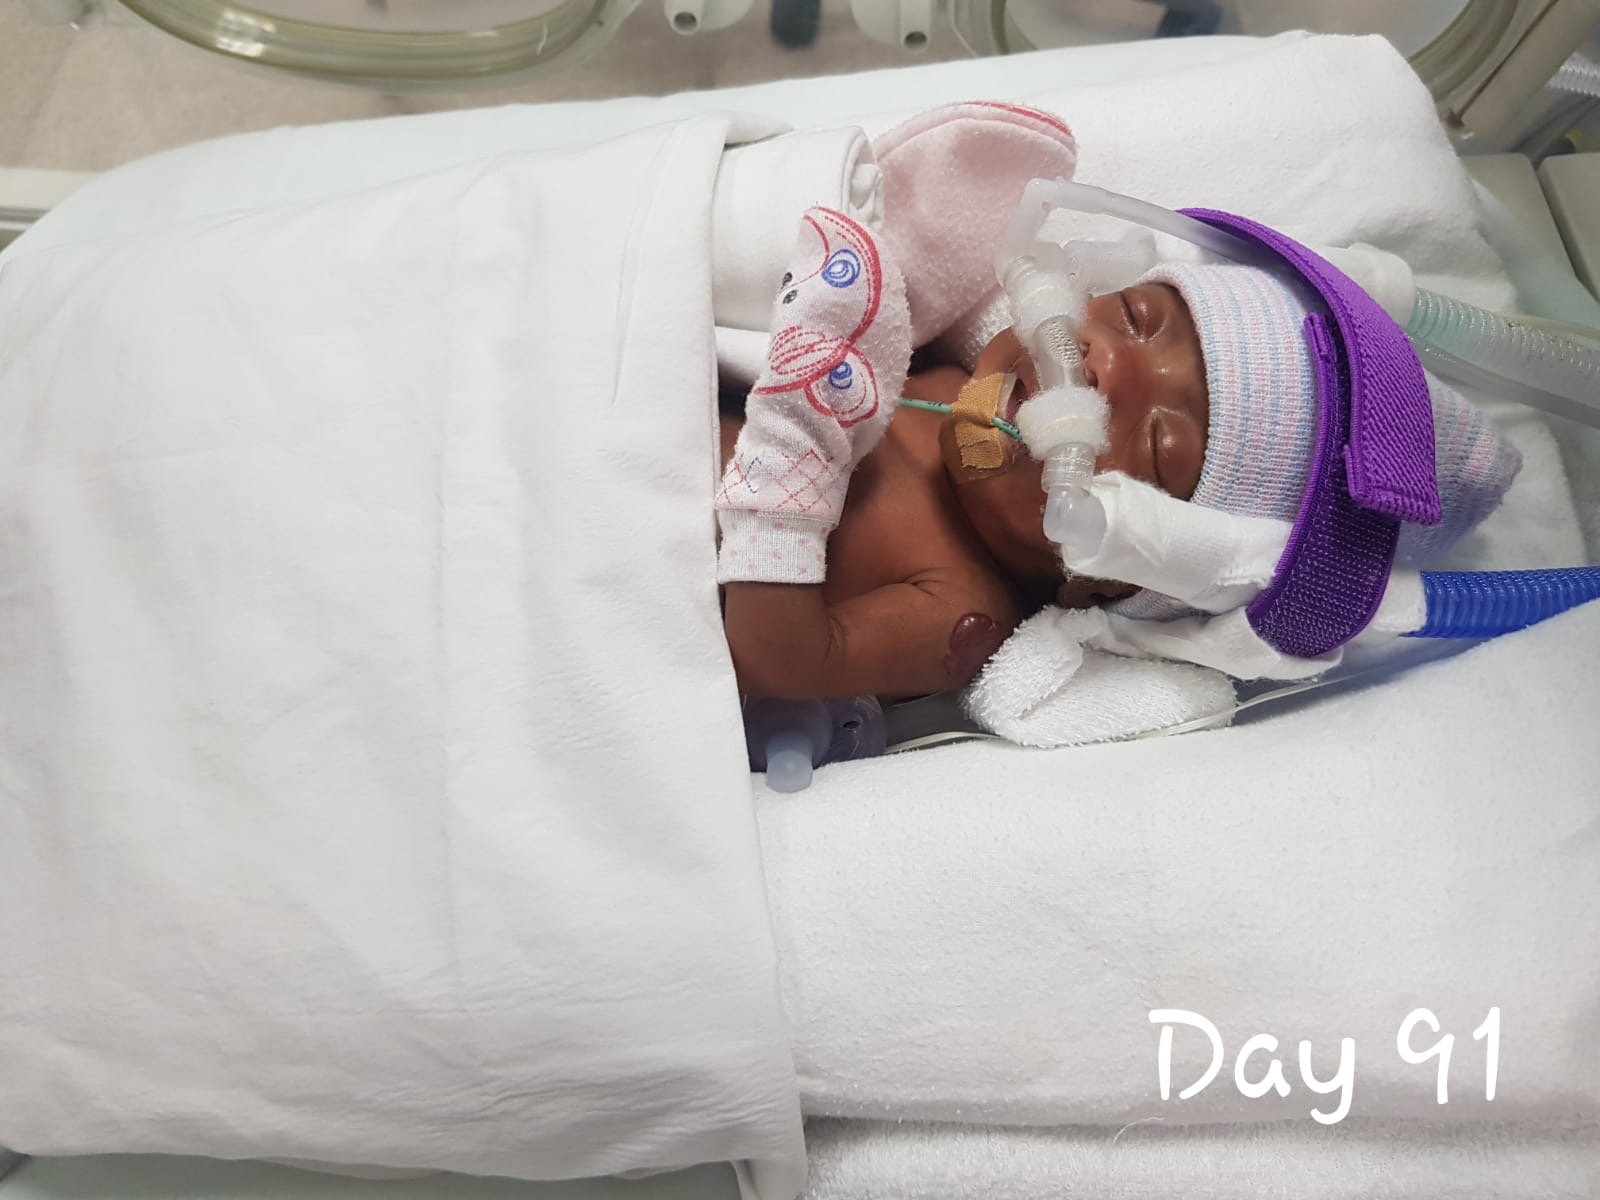 Smallest baby ever discharged from NUH weighed 345g, could not be held ...